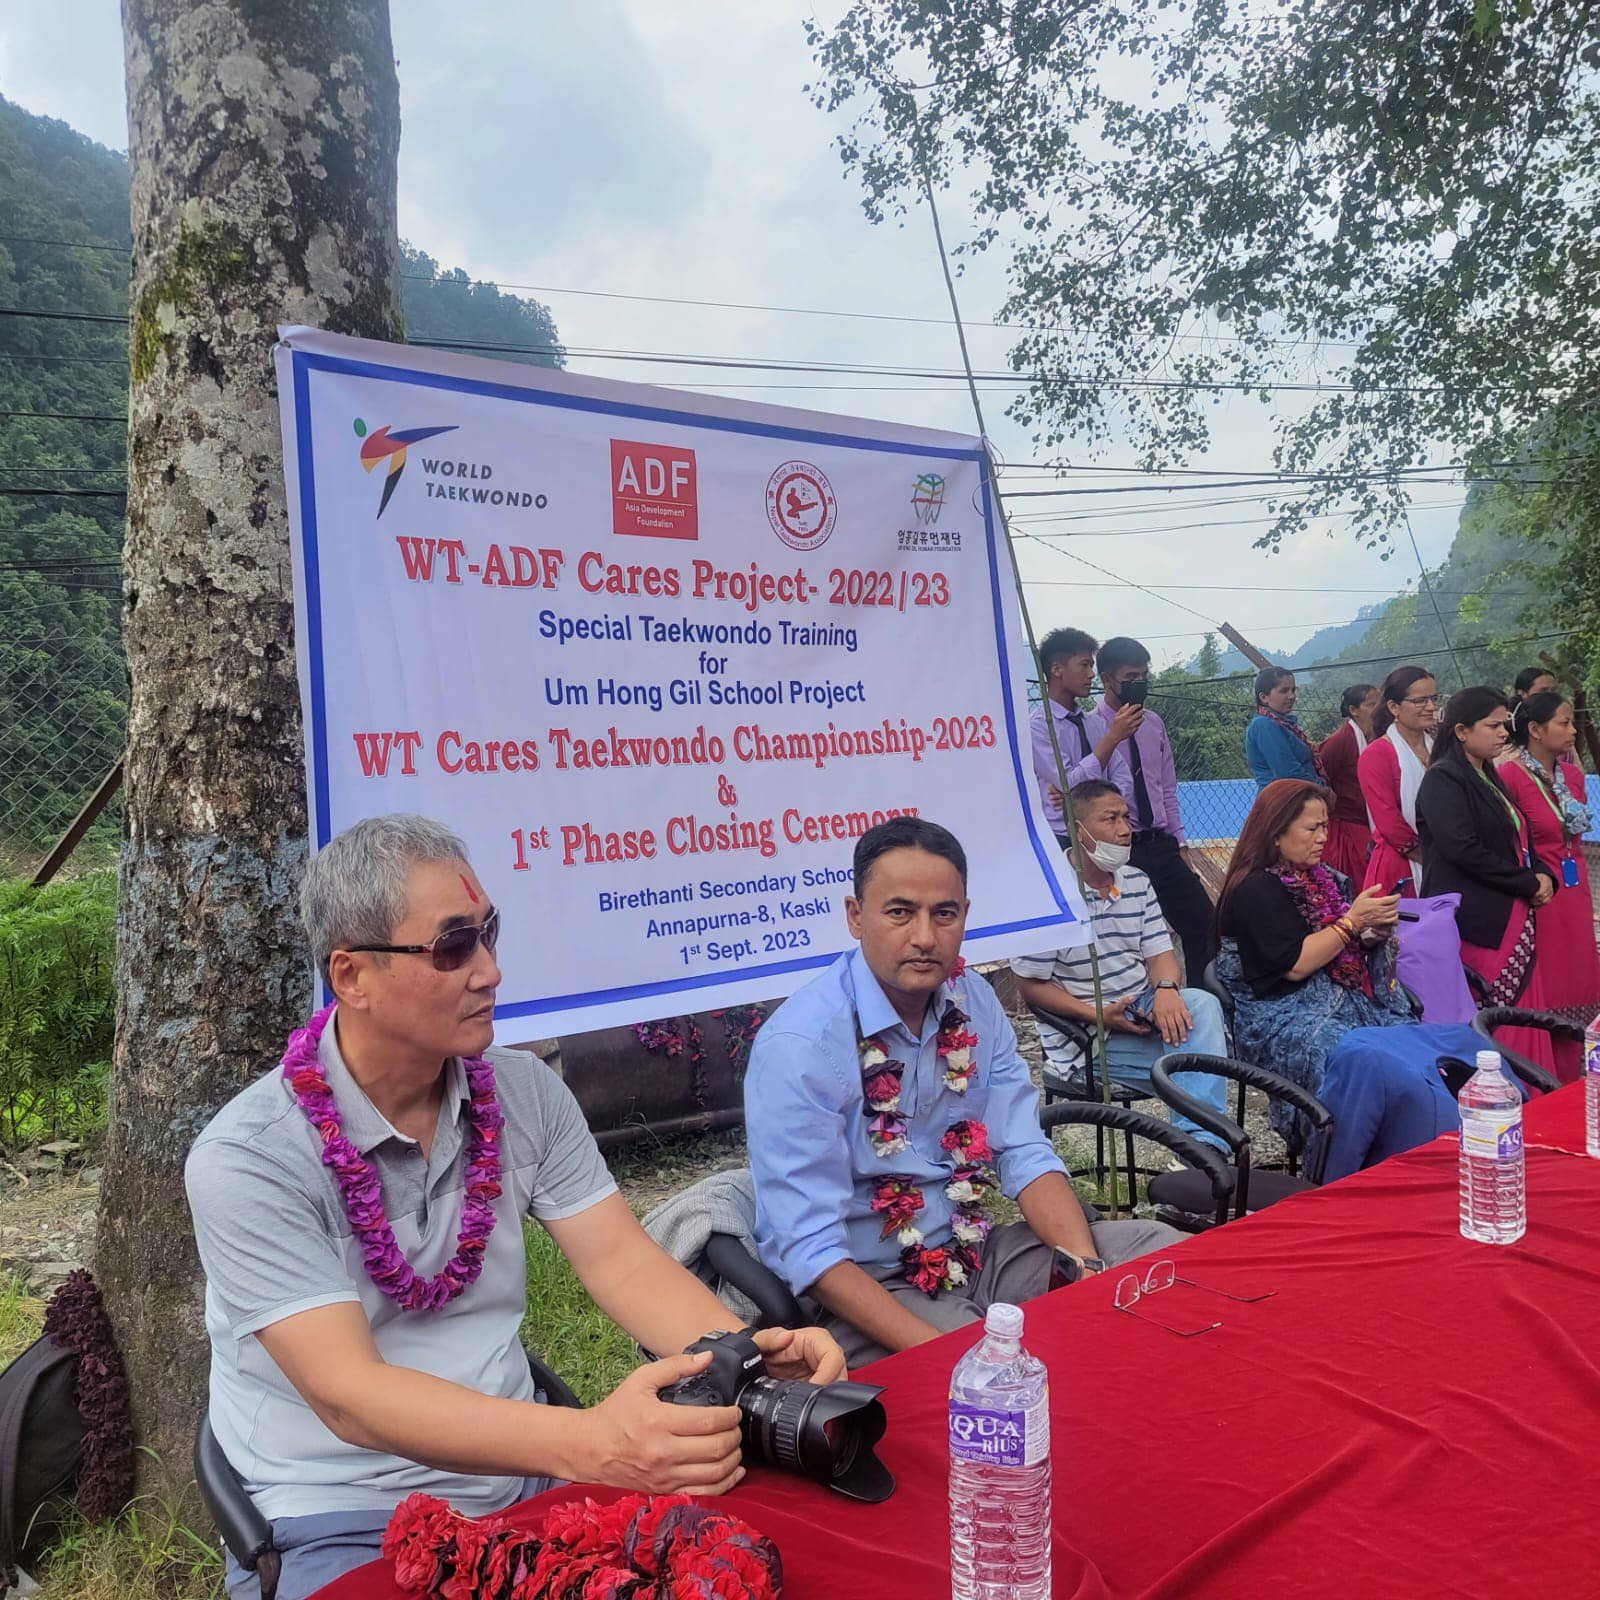 The first phase of the World Taekwondo ADF Cares Programme in Nepal has been completed in the Kaski district ©Nepal Taekwondo Association 